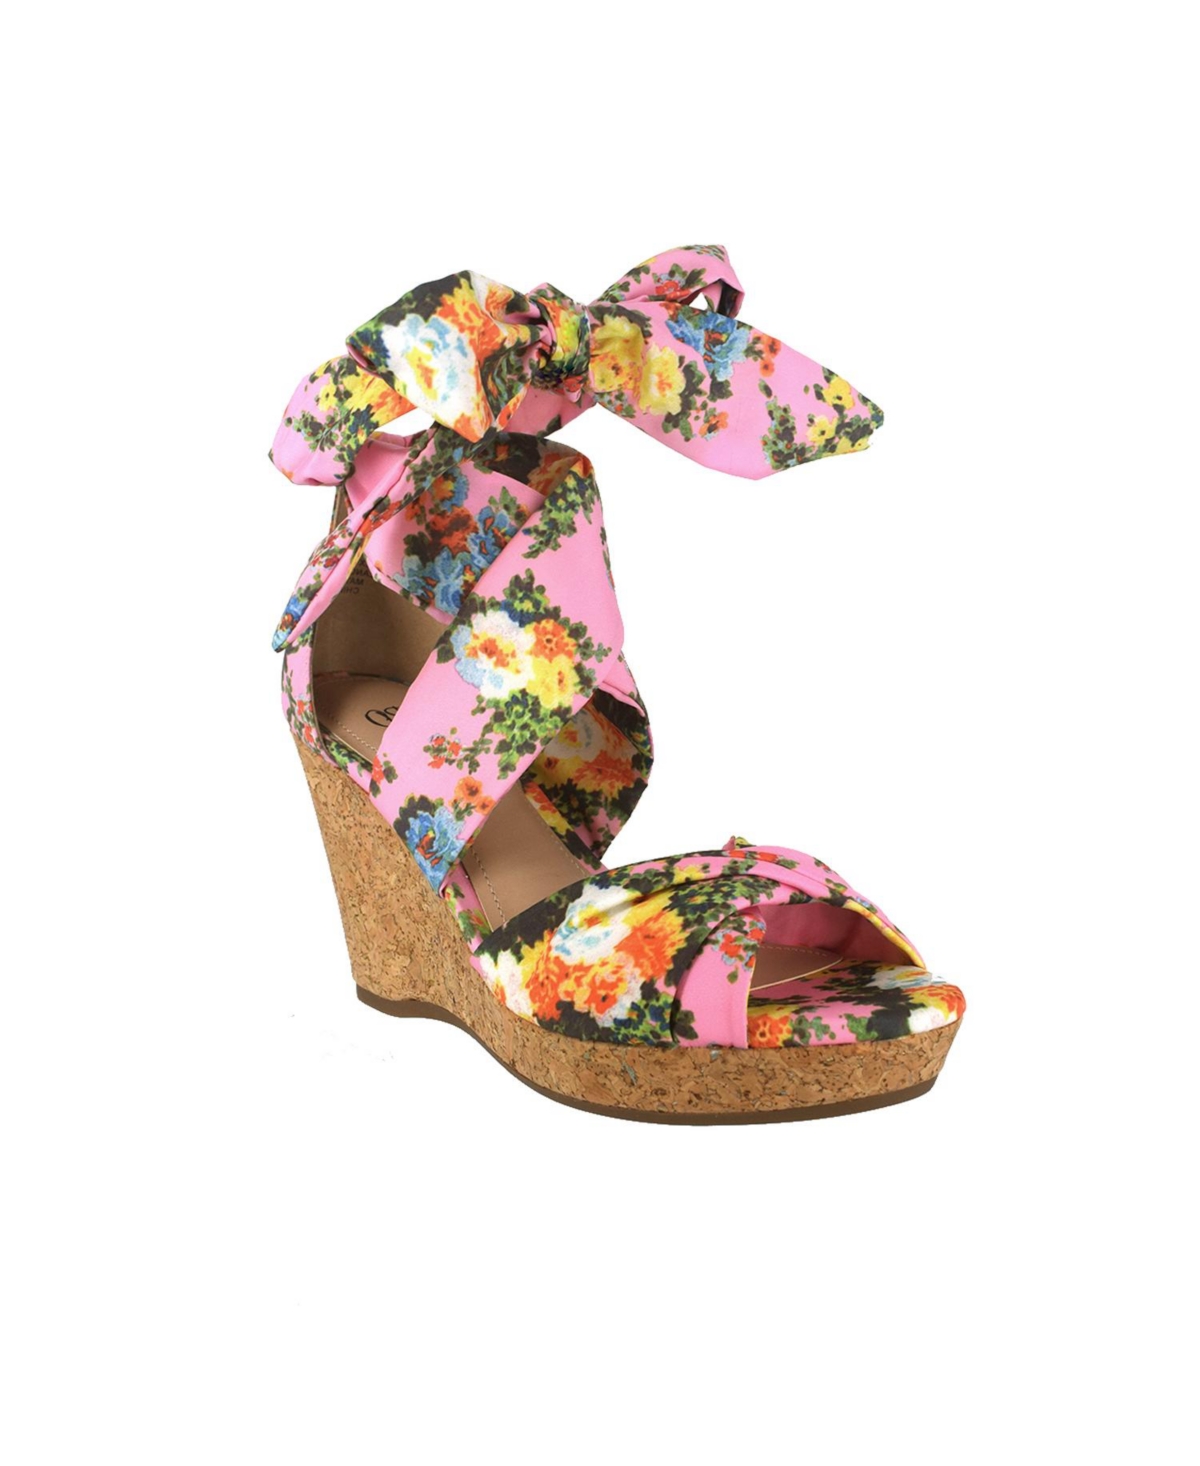 Impo Women's Omyra Ankle Wrap Wedge Sandals Women's Shoes In Pink Multi ...